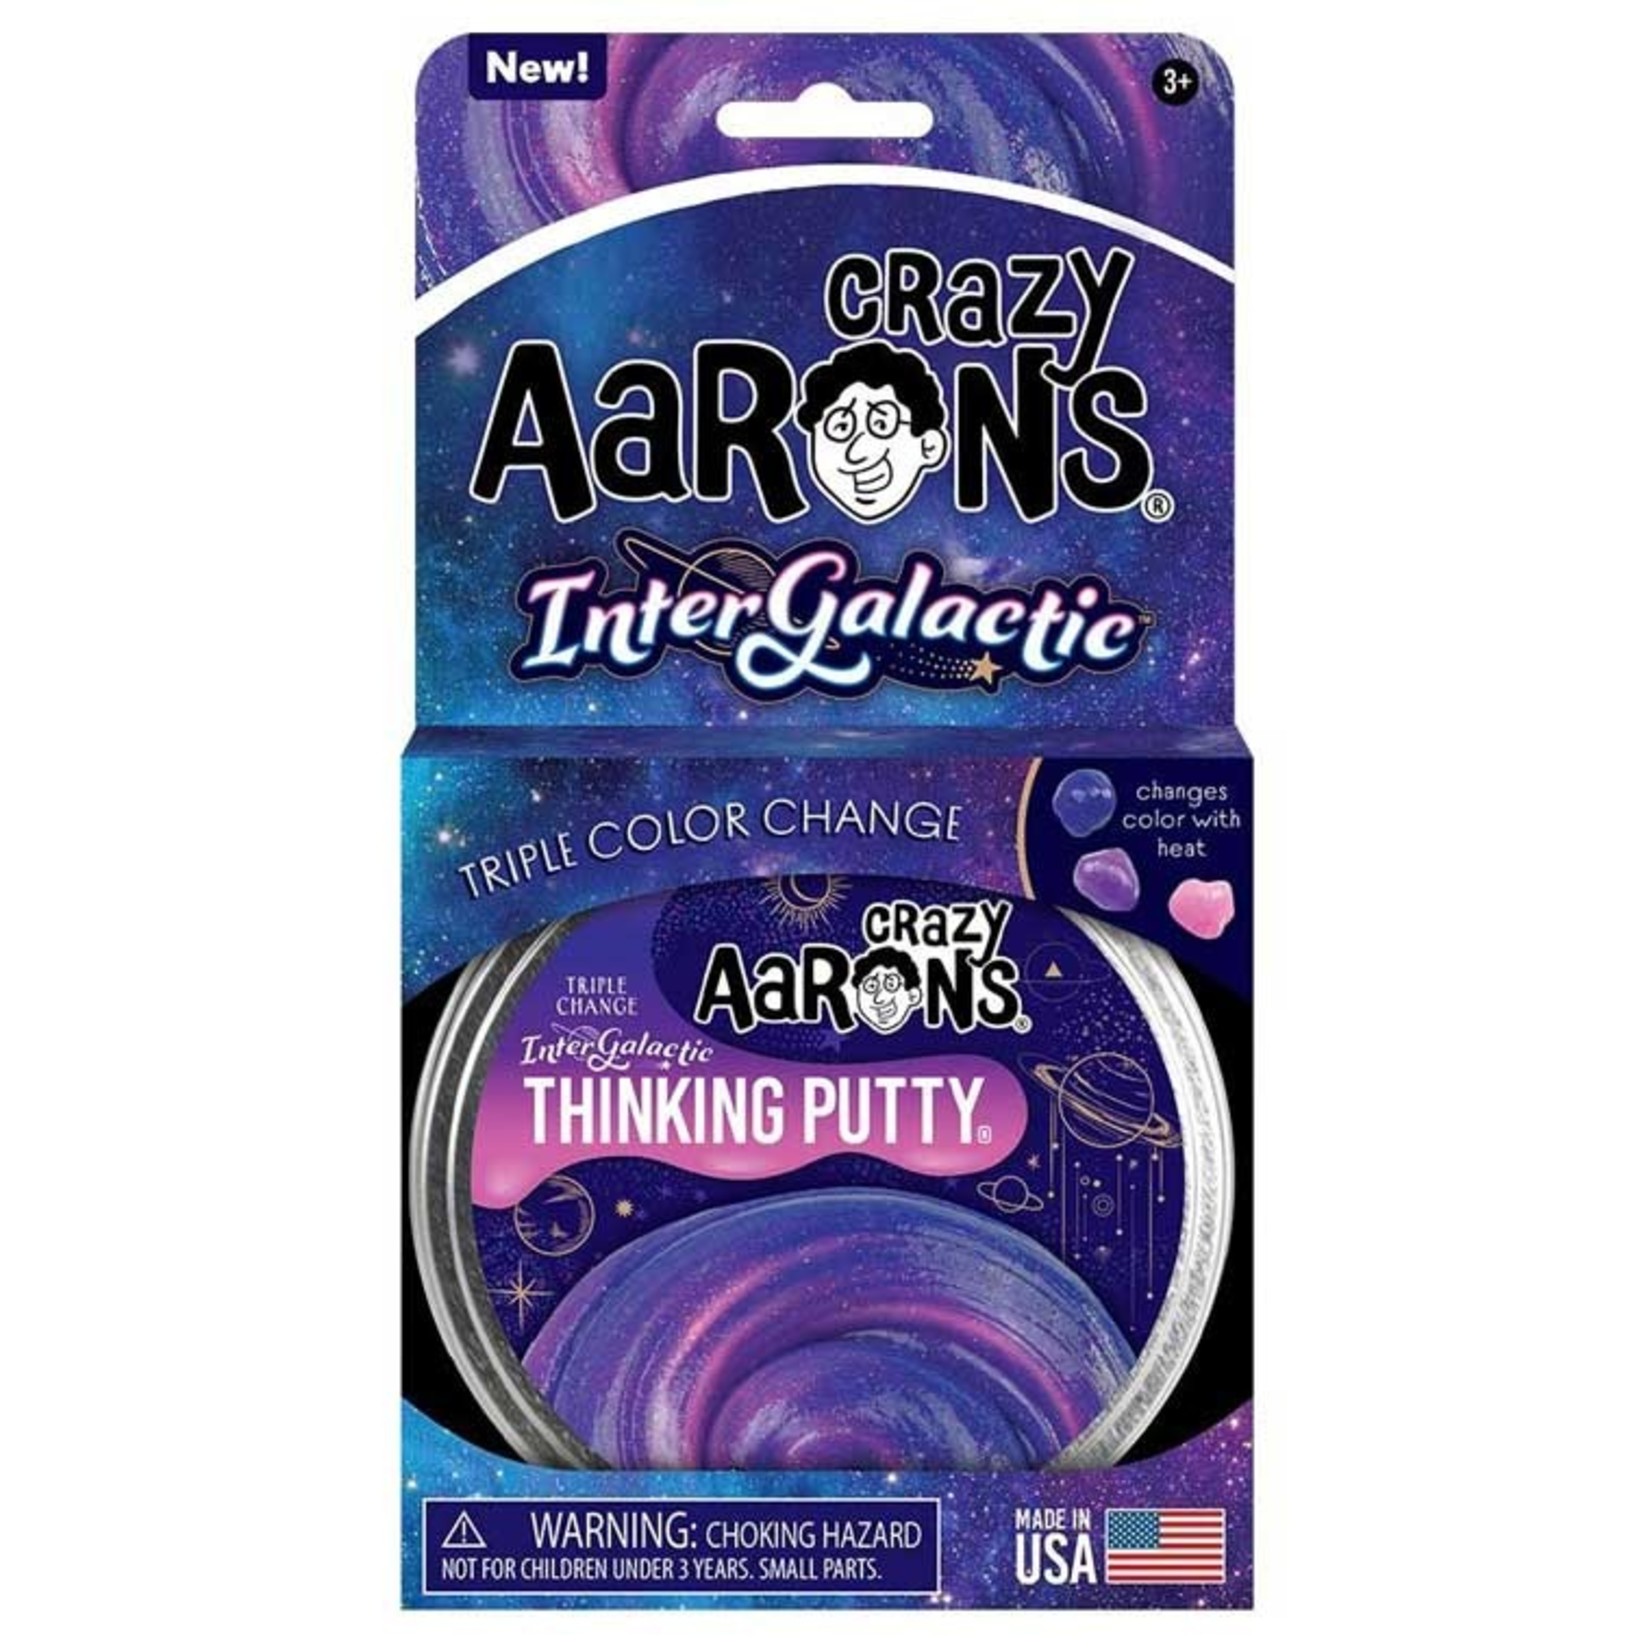 Crazy Aaron’s Thinking Putty - Intergalactic